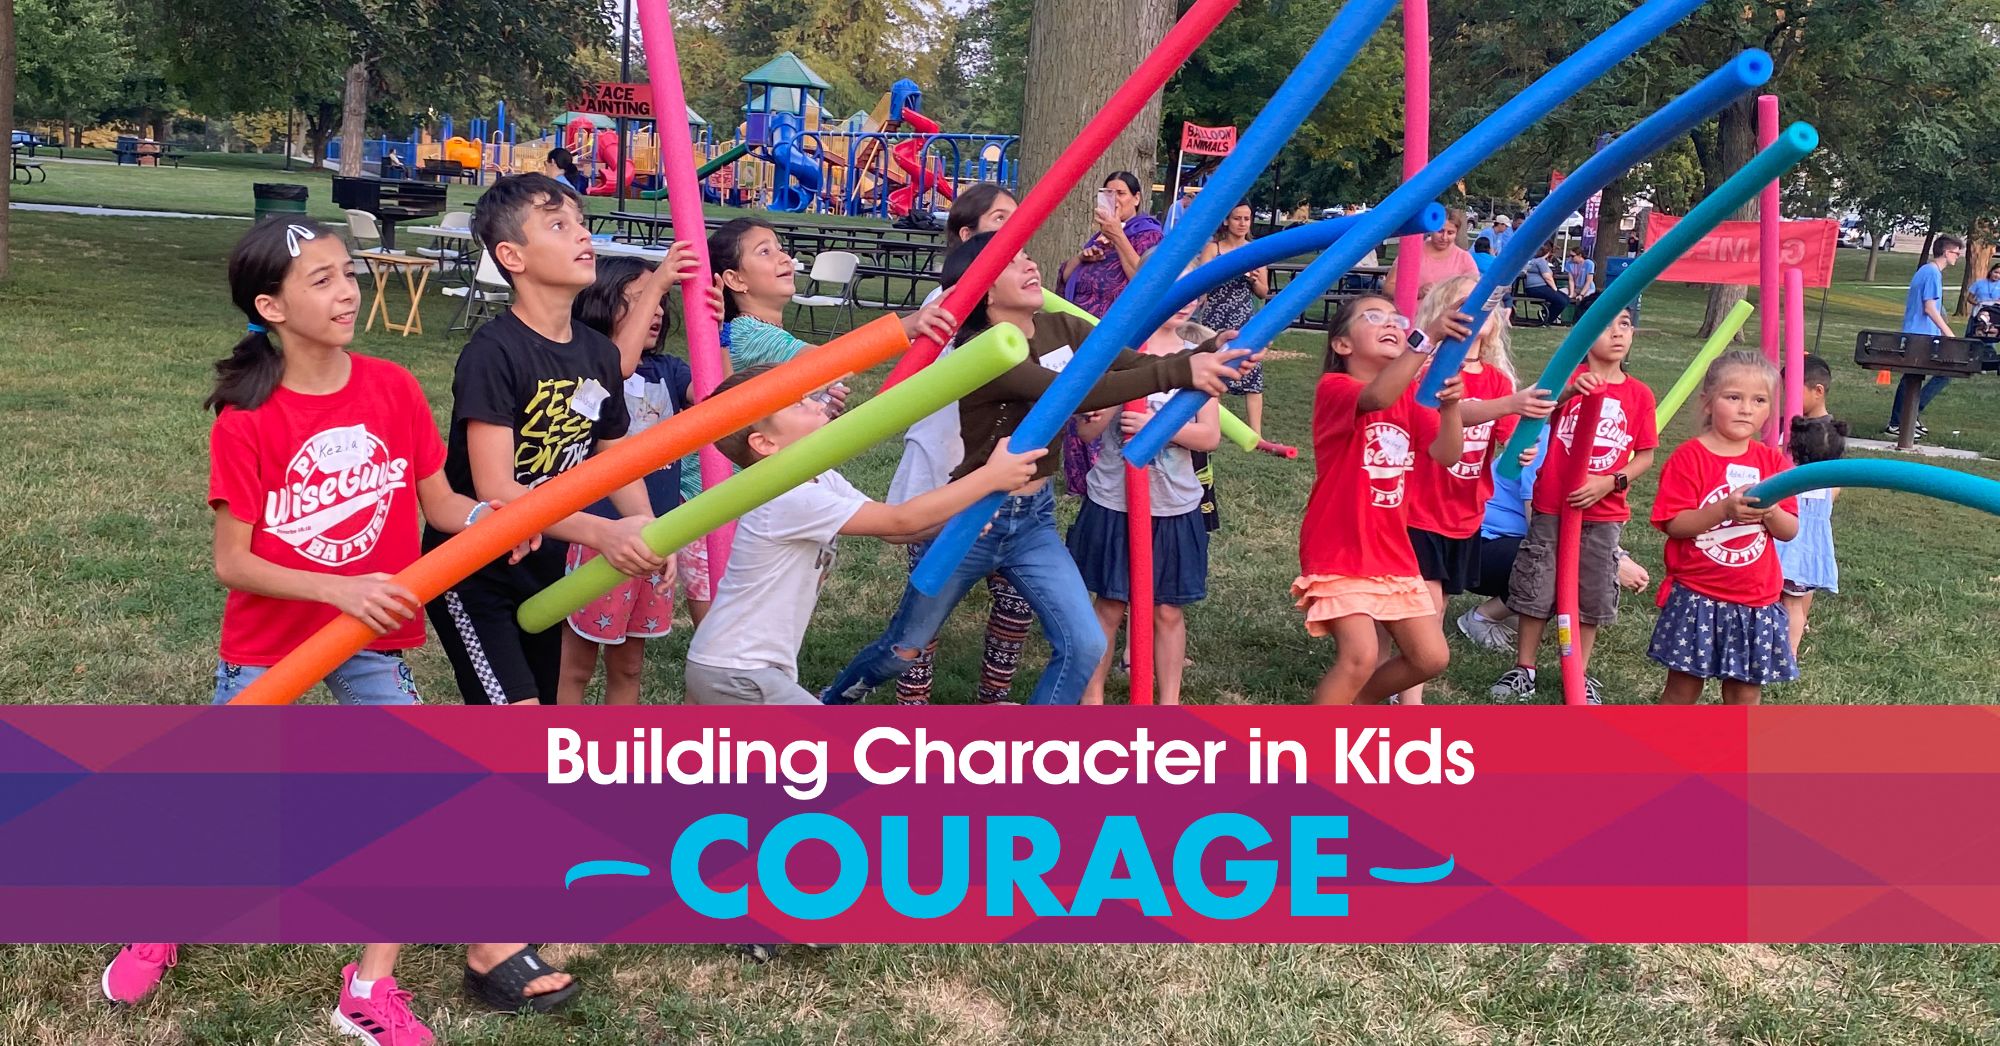 Plains Baptist Church Wiseguys character quest building character in kids courage